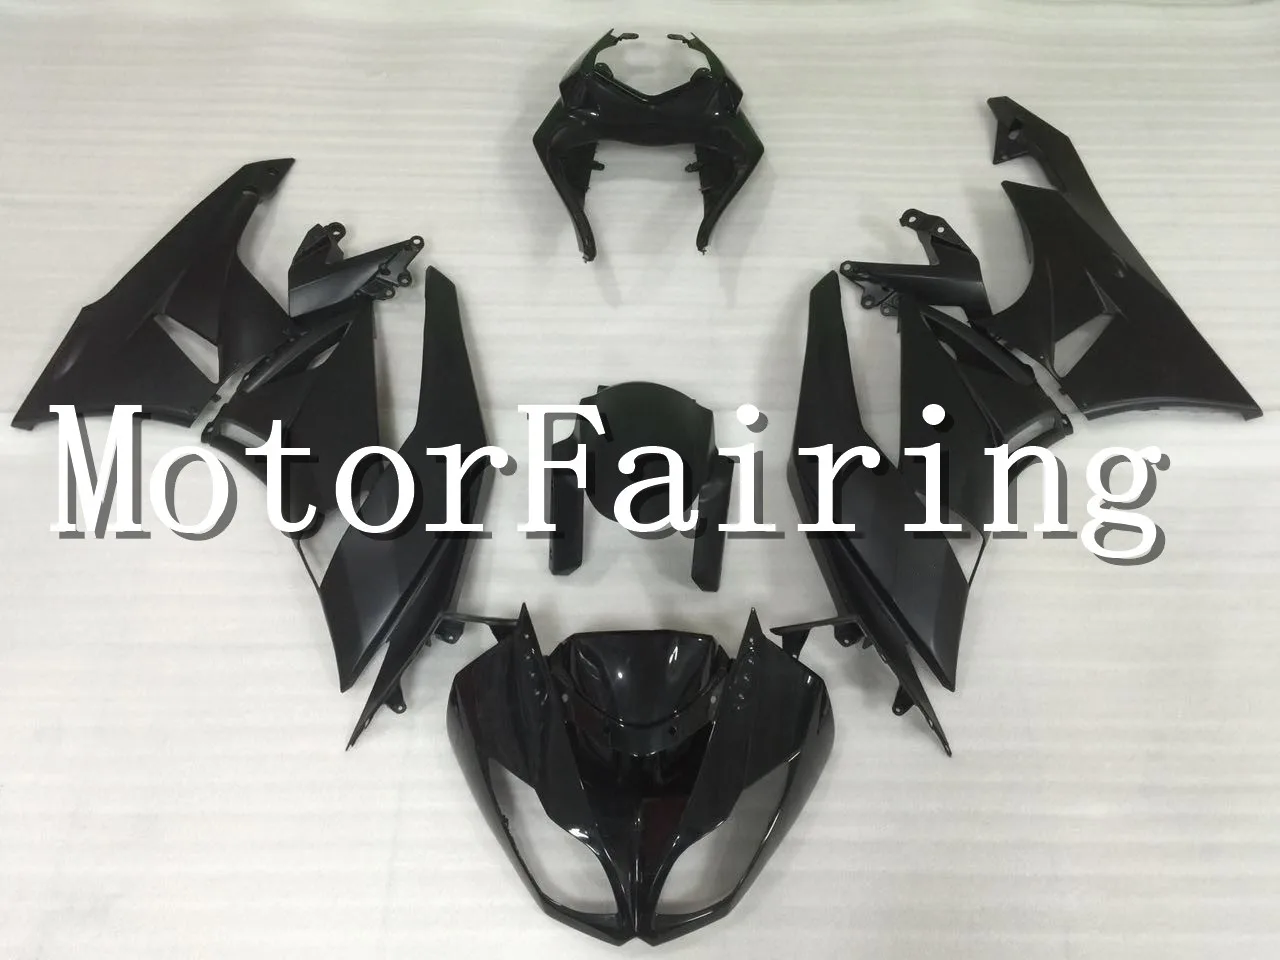 

Motorcycle Bodywork Fairing Kit Fit For Ninja ZX6R 2009 2010 2011 2012 ZX-6R ABS Plastic Injection Molding Moto Hull Z609A673